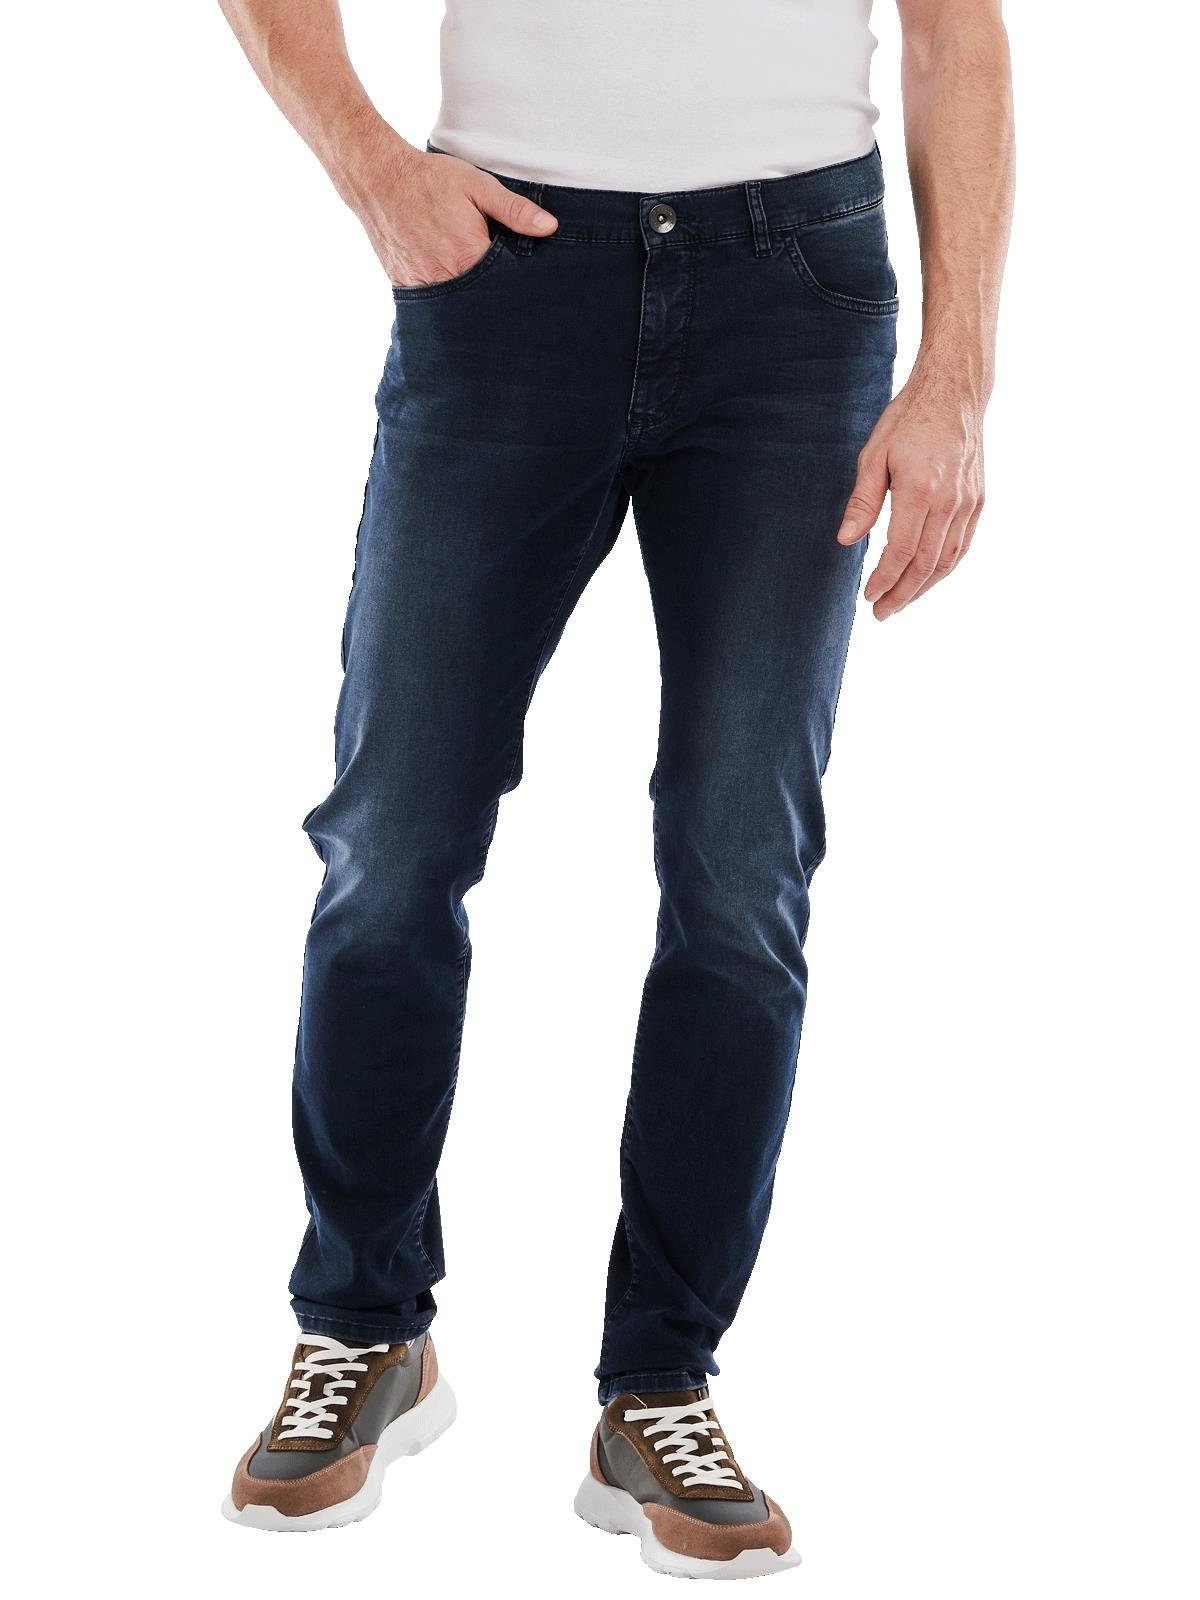 5-Pocket Engbers Stretch-Jeans Jeans Superstretch